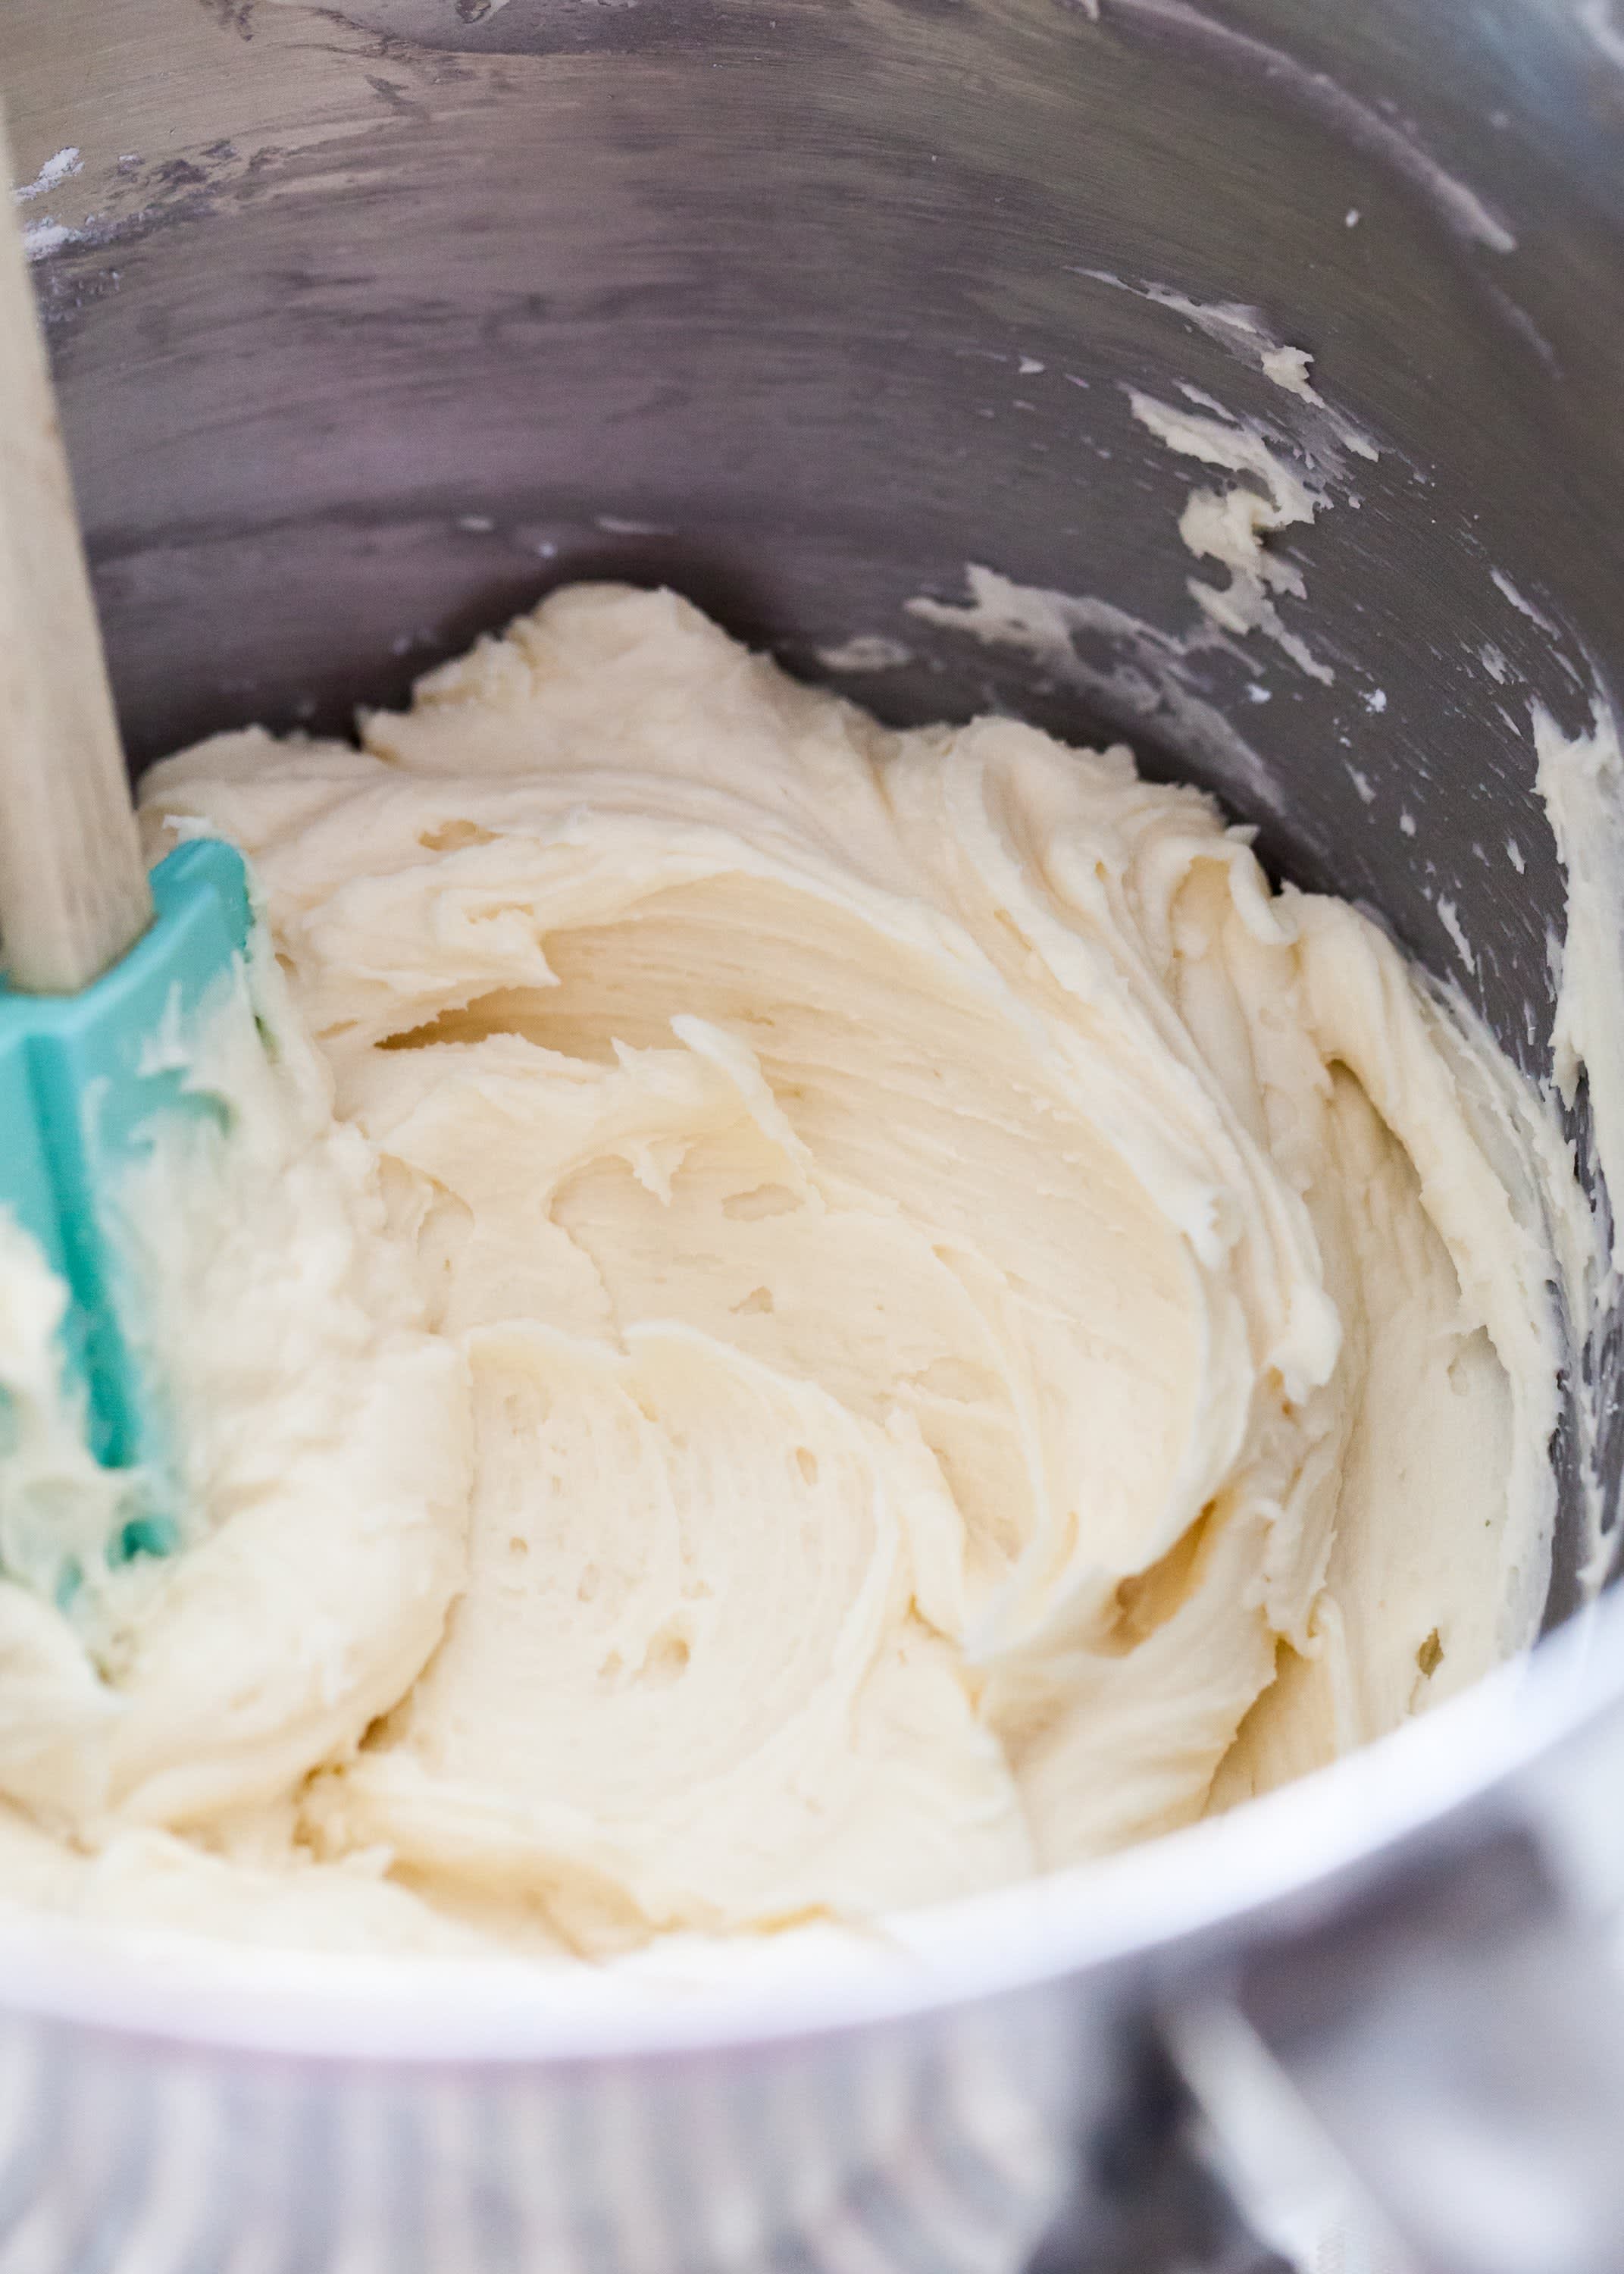 How To Make a Basic Buttercream